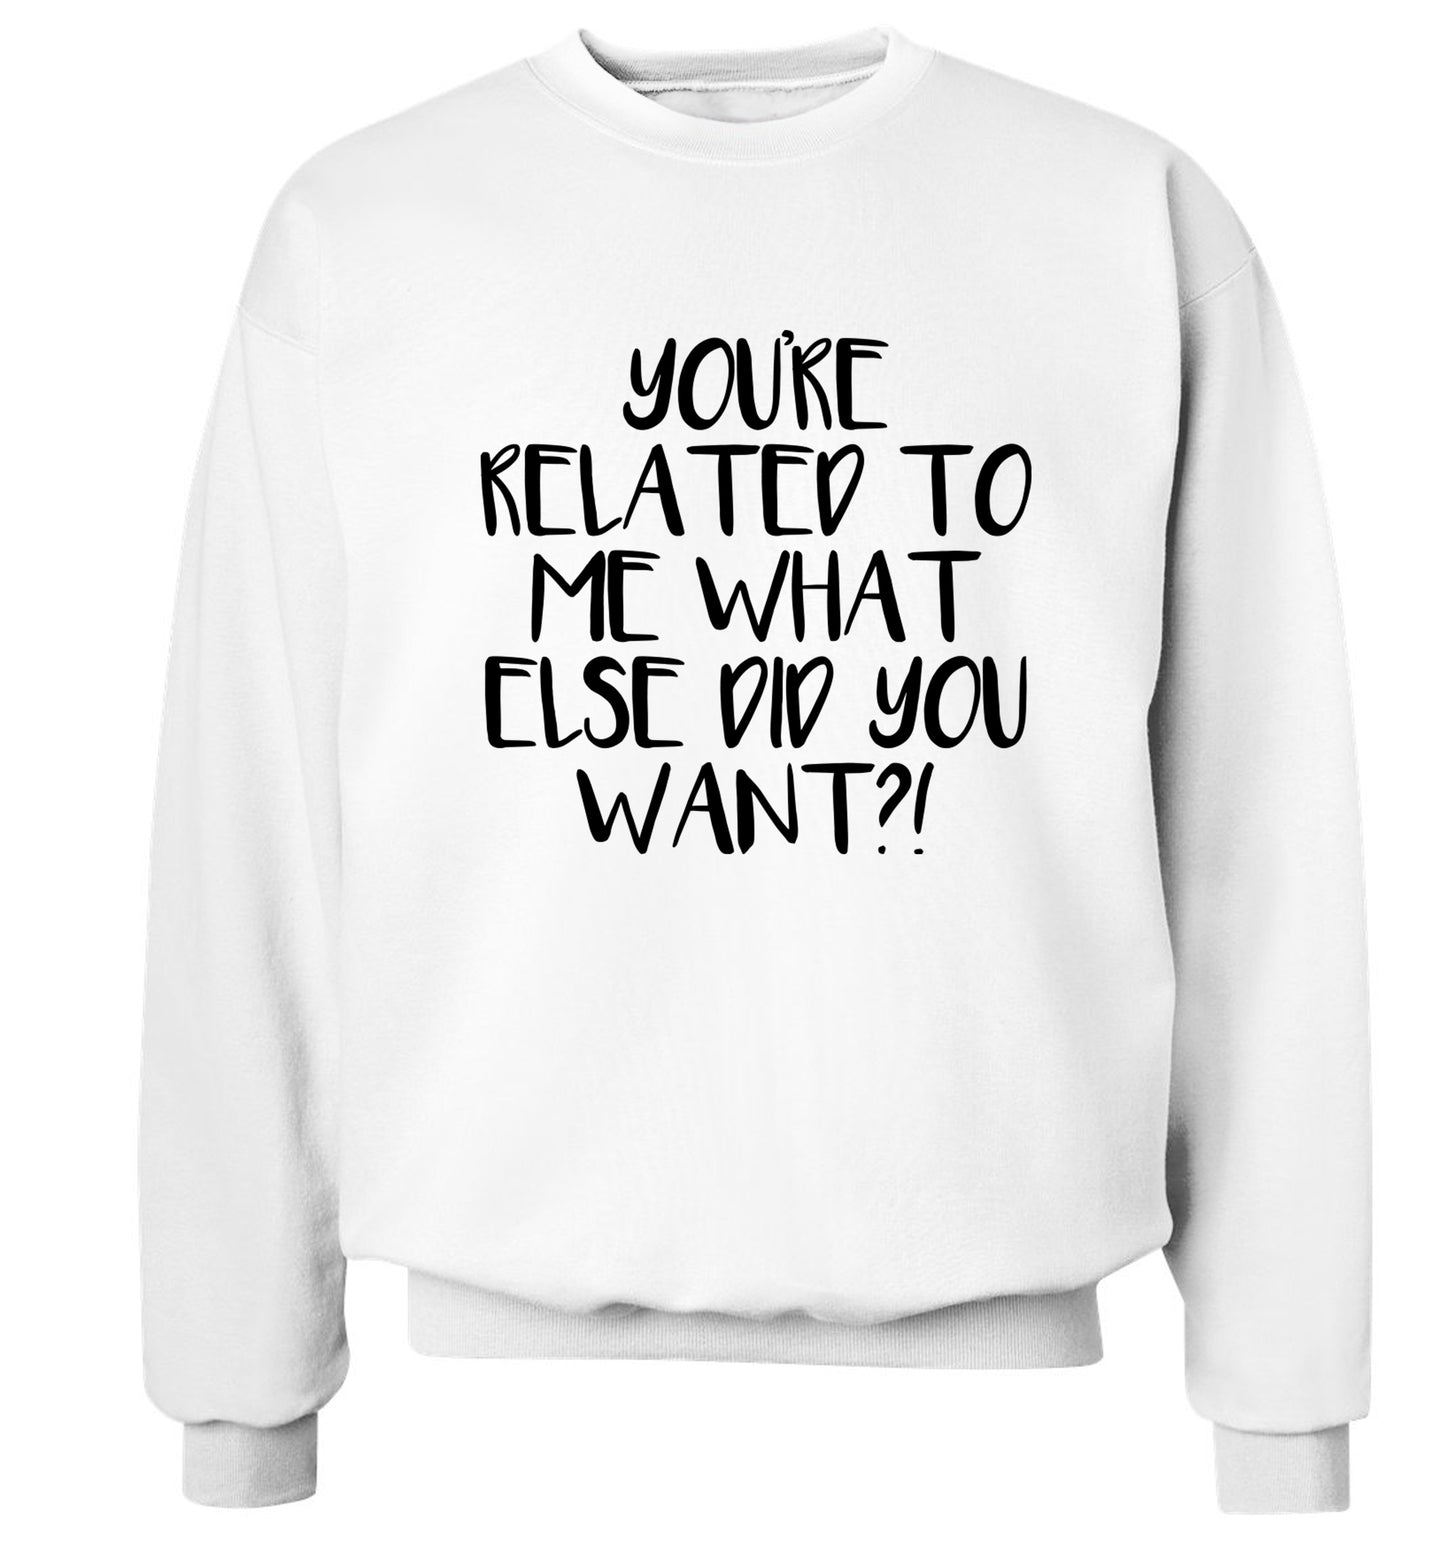 You're related to me what more do you want? Adult's unisex white Sweater 2XL